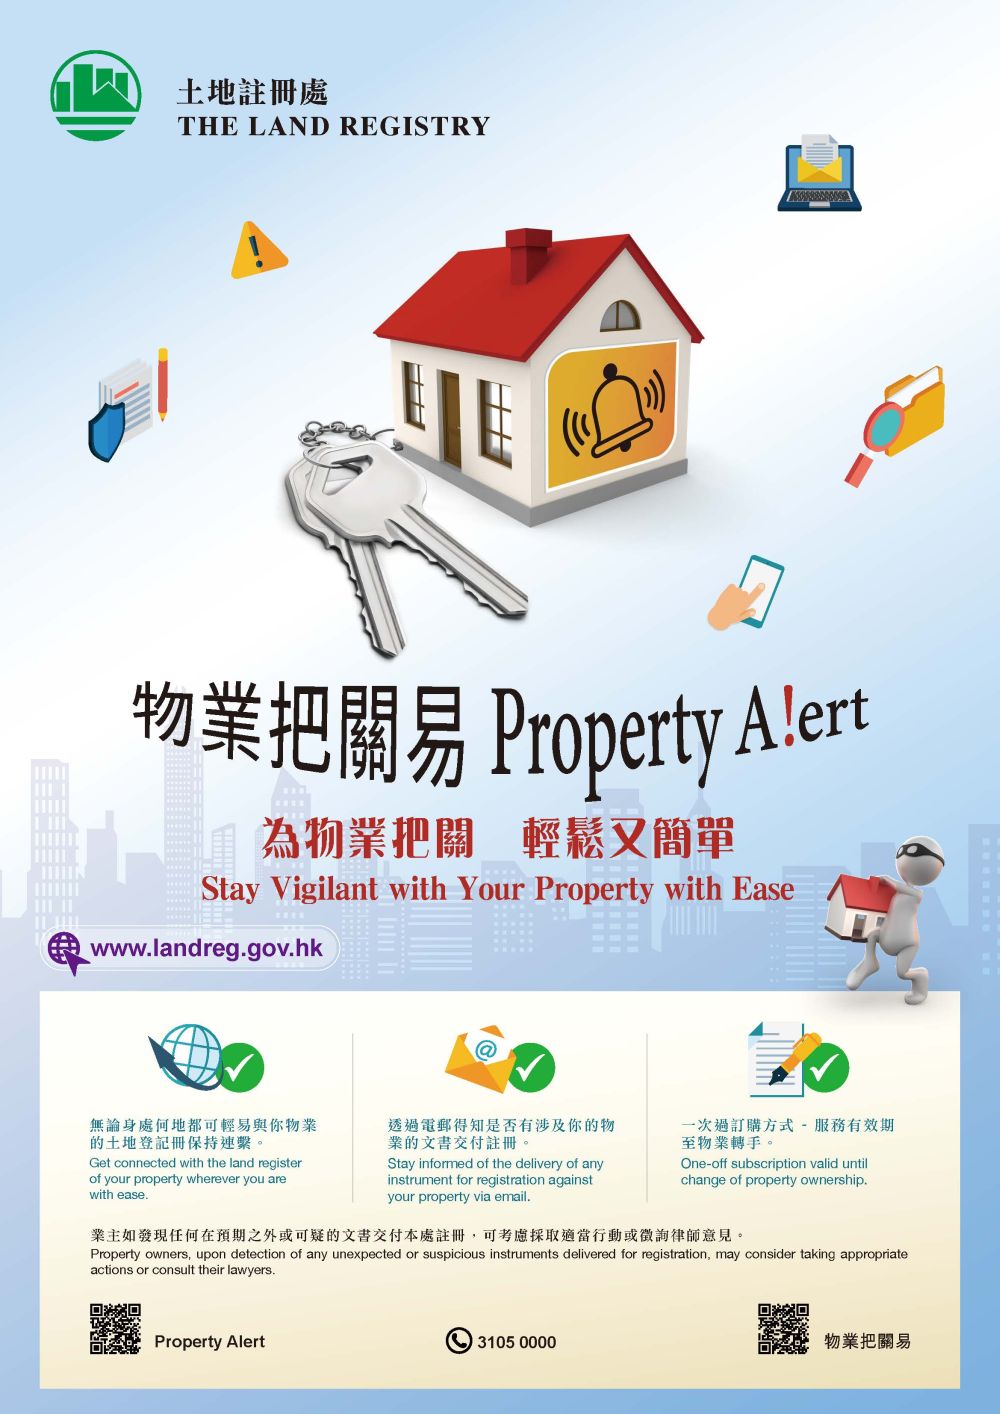 The LR’s “Property Alert” service enables property owners to remain vigilant of their properties easily by keeping track of the land registers anywhere in a quick and inexpensive manner.